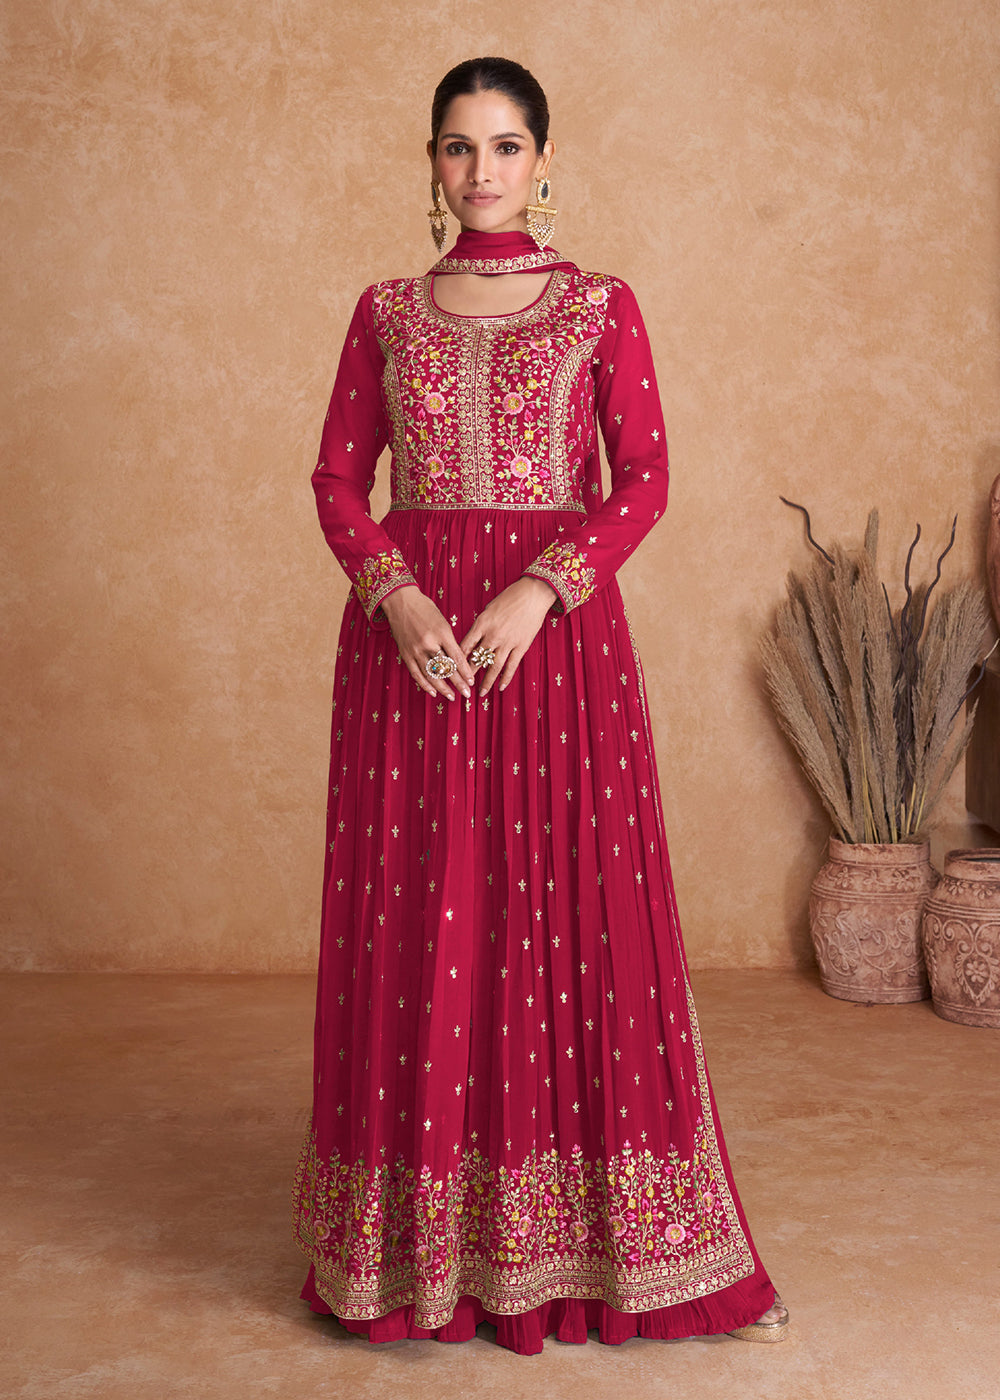 Buy Now Hot Pink Wedding Long Top Georgette Palazzo Salwar Suit Online in USA, UK, Canada, Germany, Australia & Worldwide at Empress Clothing.